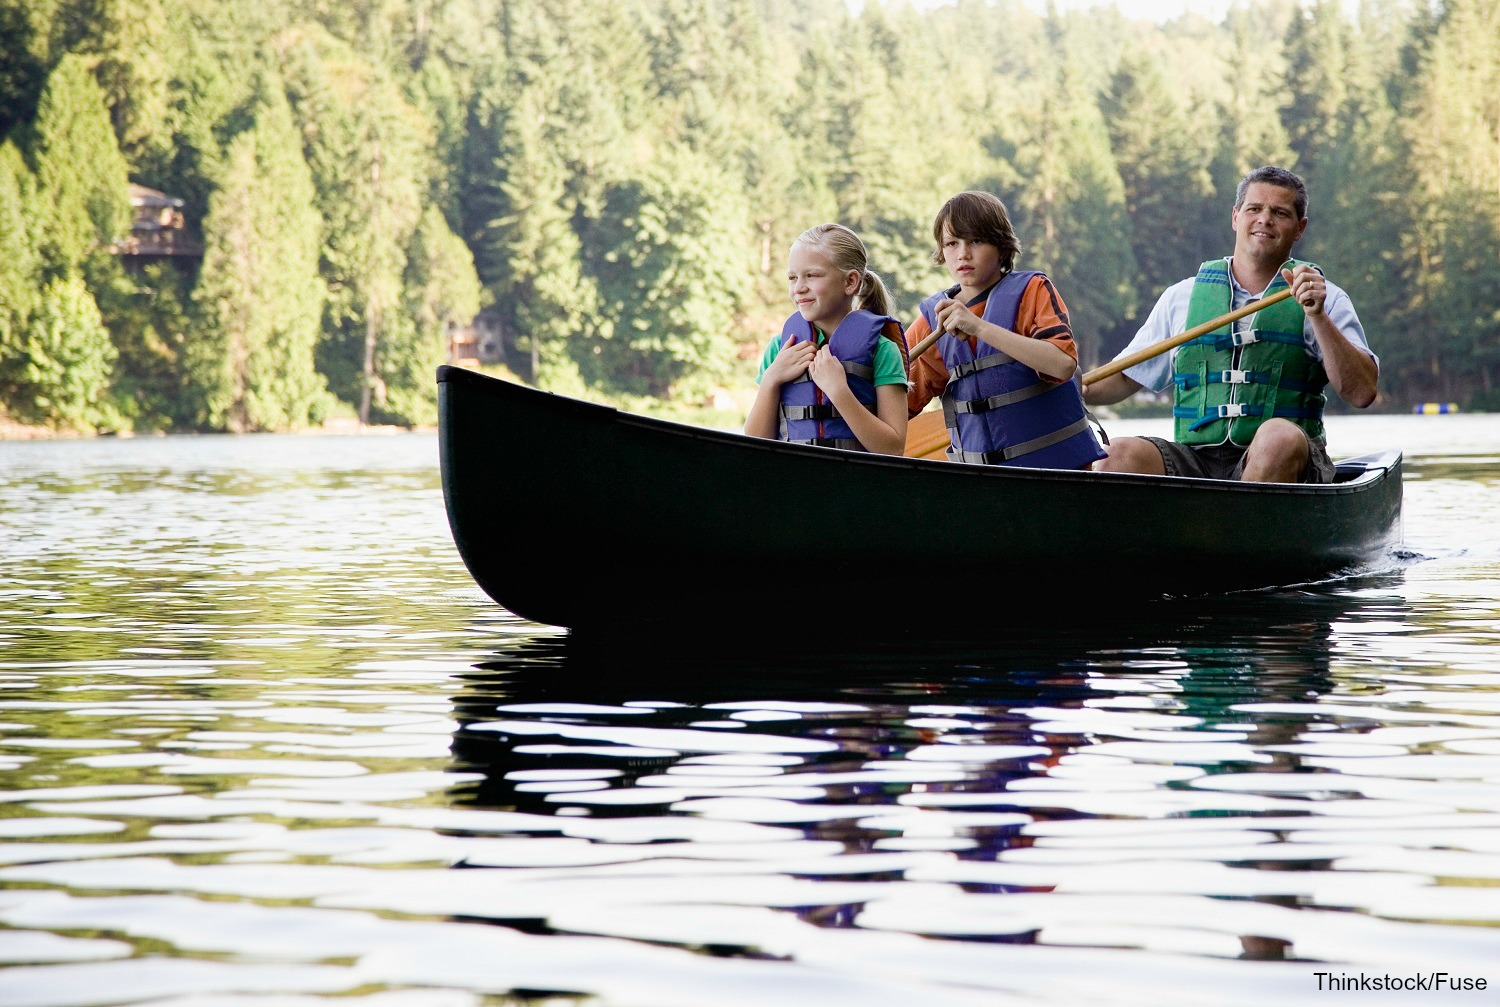 Dad and children in a canoe.